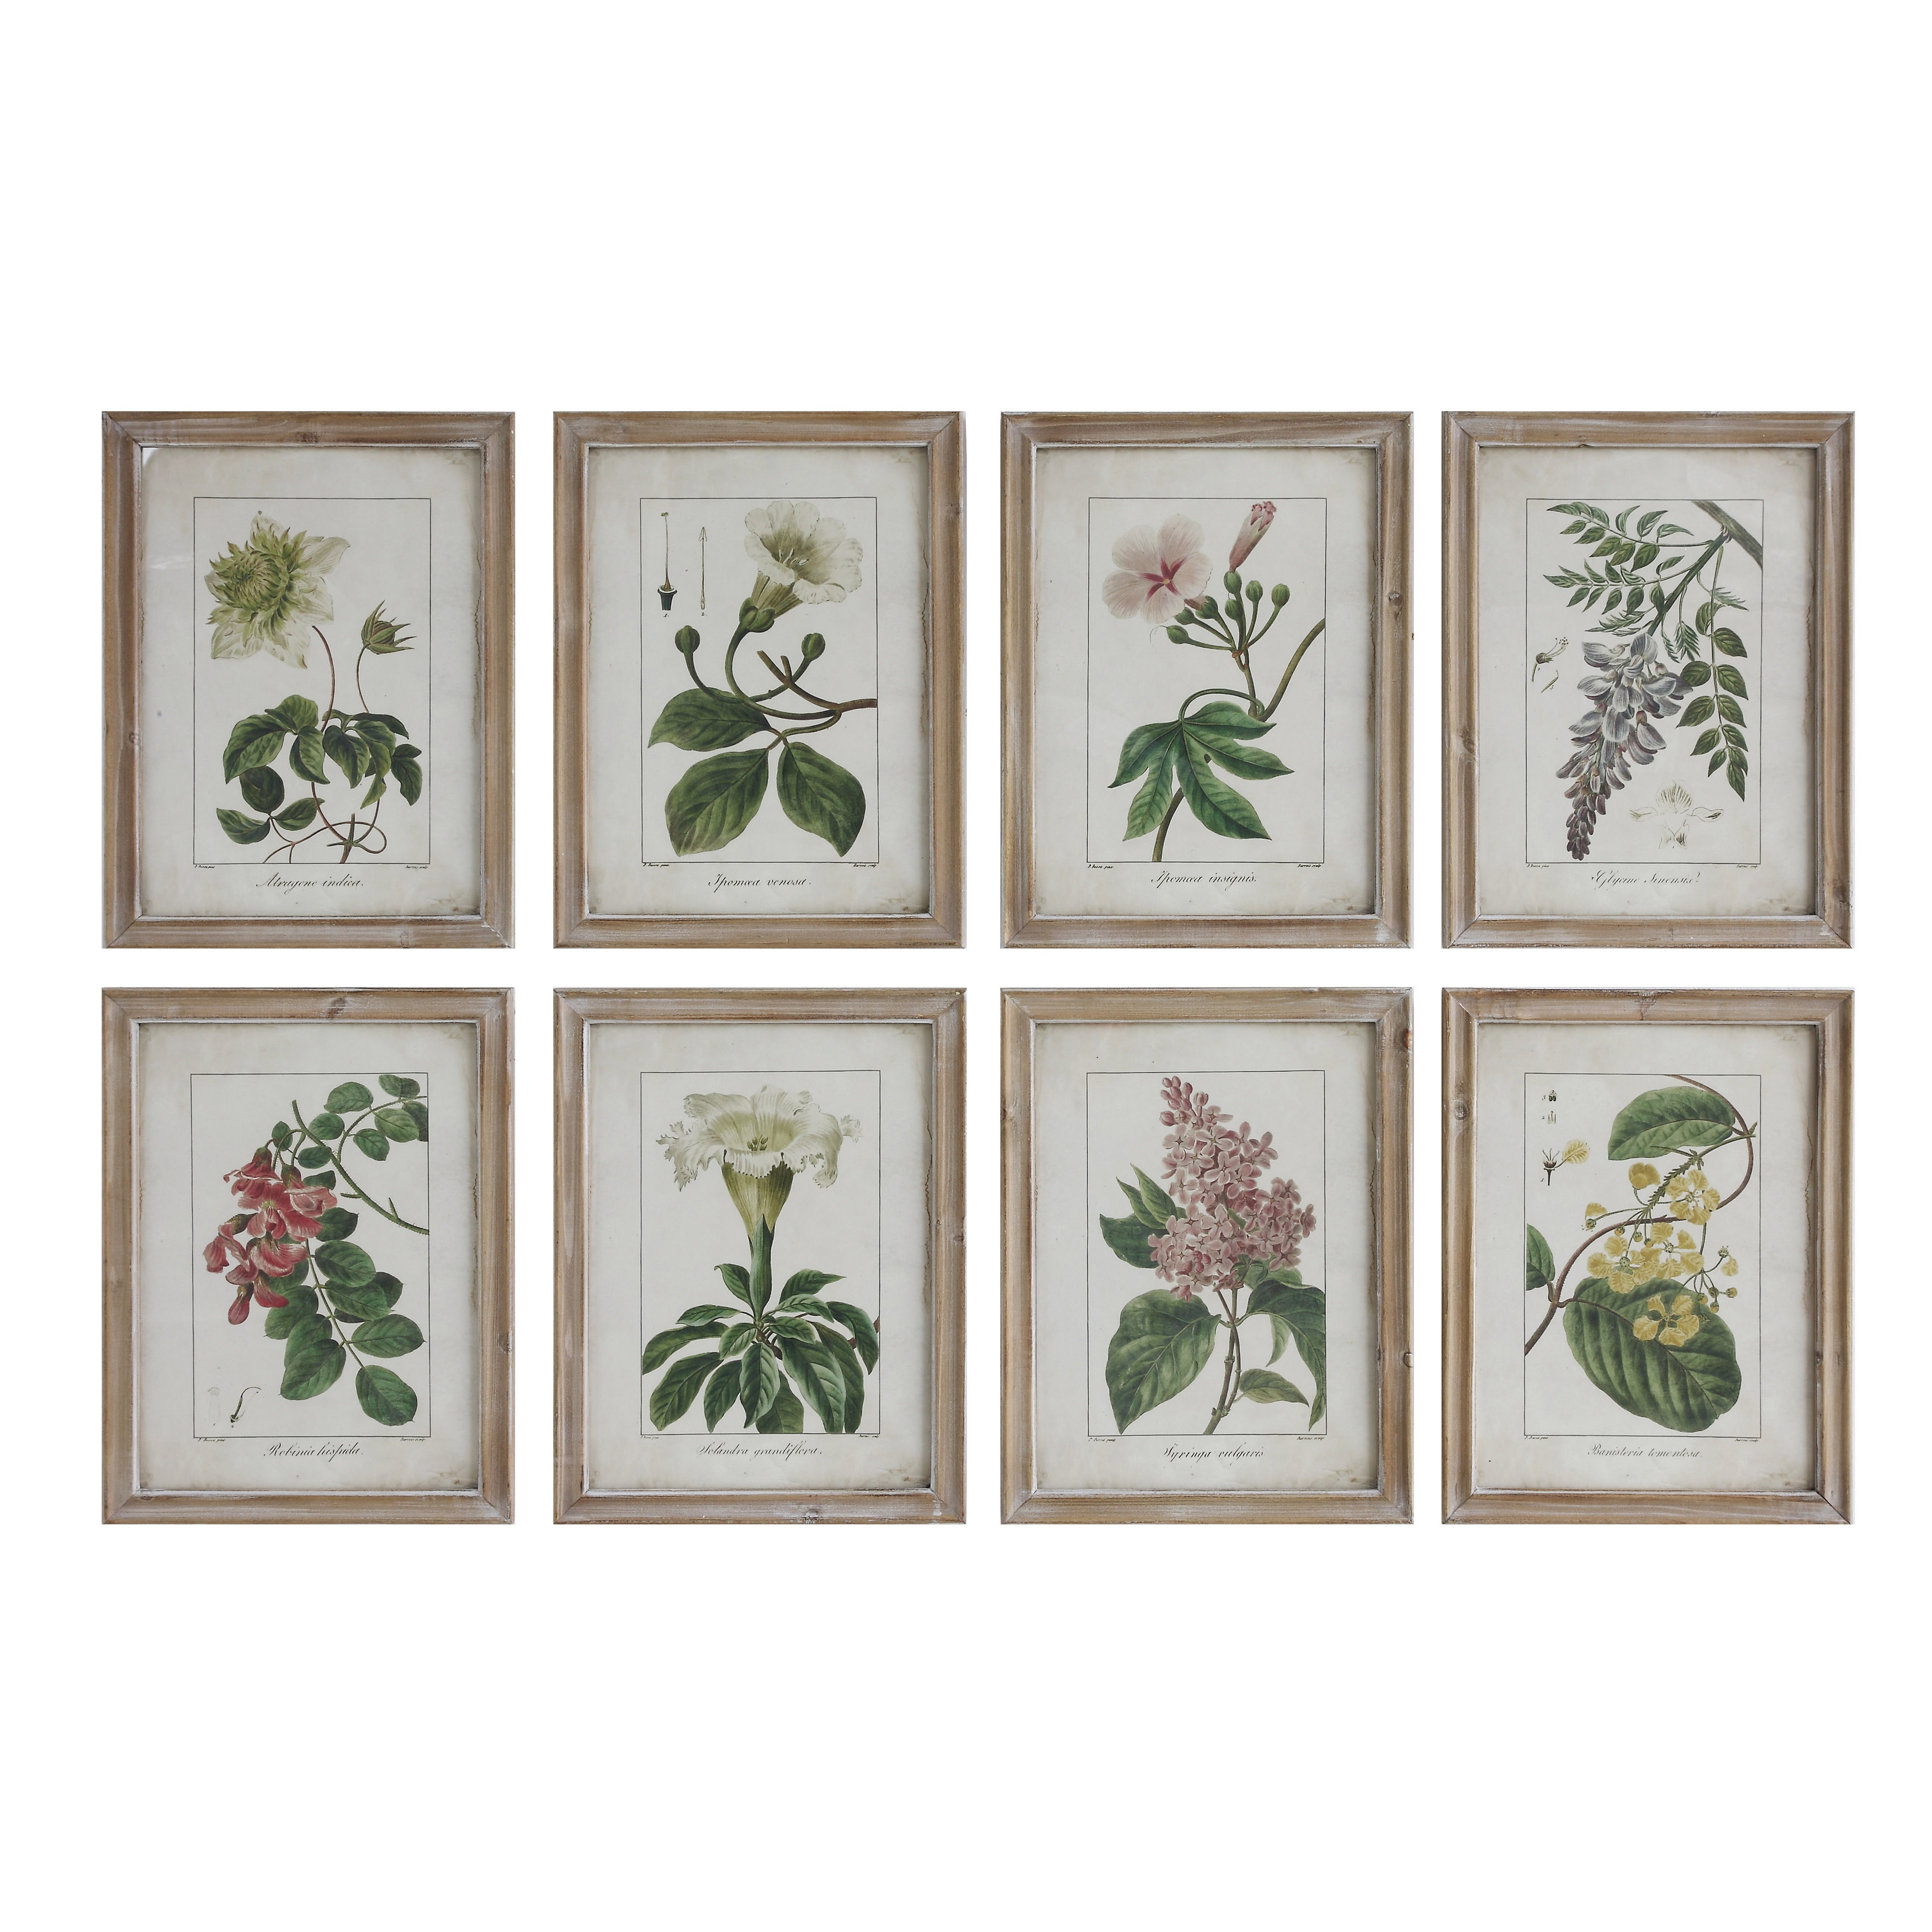 Wood Framed Wall Décor with Floral Image Reproductions (Set of 8 Designs) - Image 0